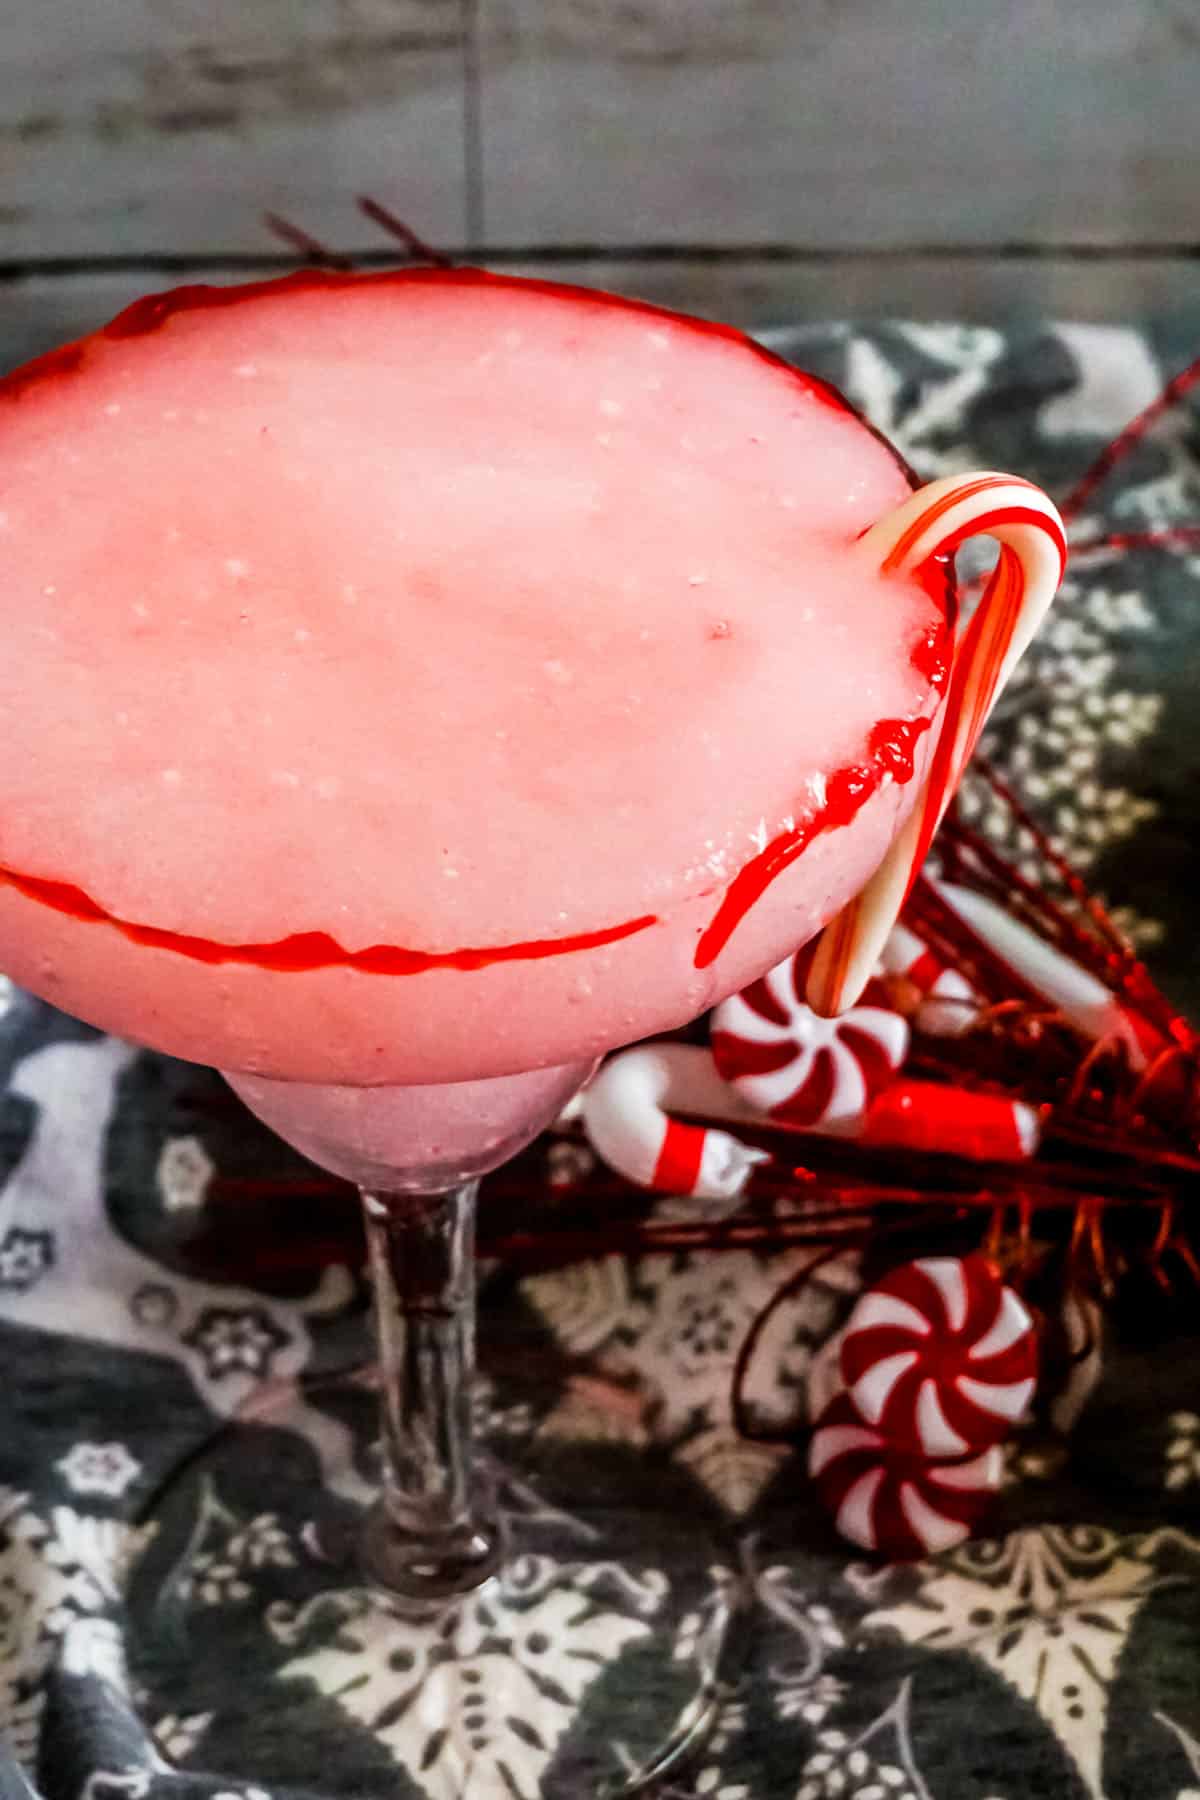 Candy Cane dangles on the side of the Candy Cane Margarita.